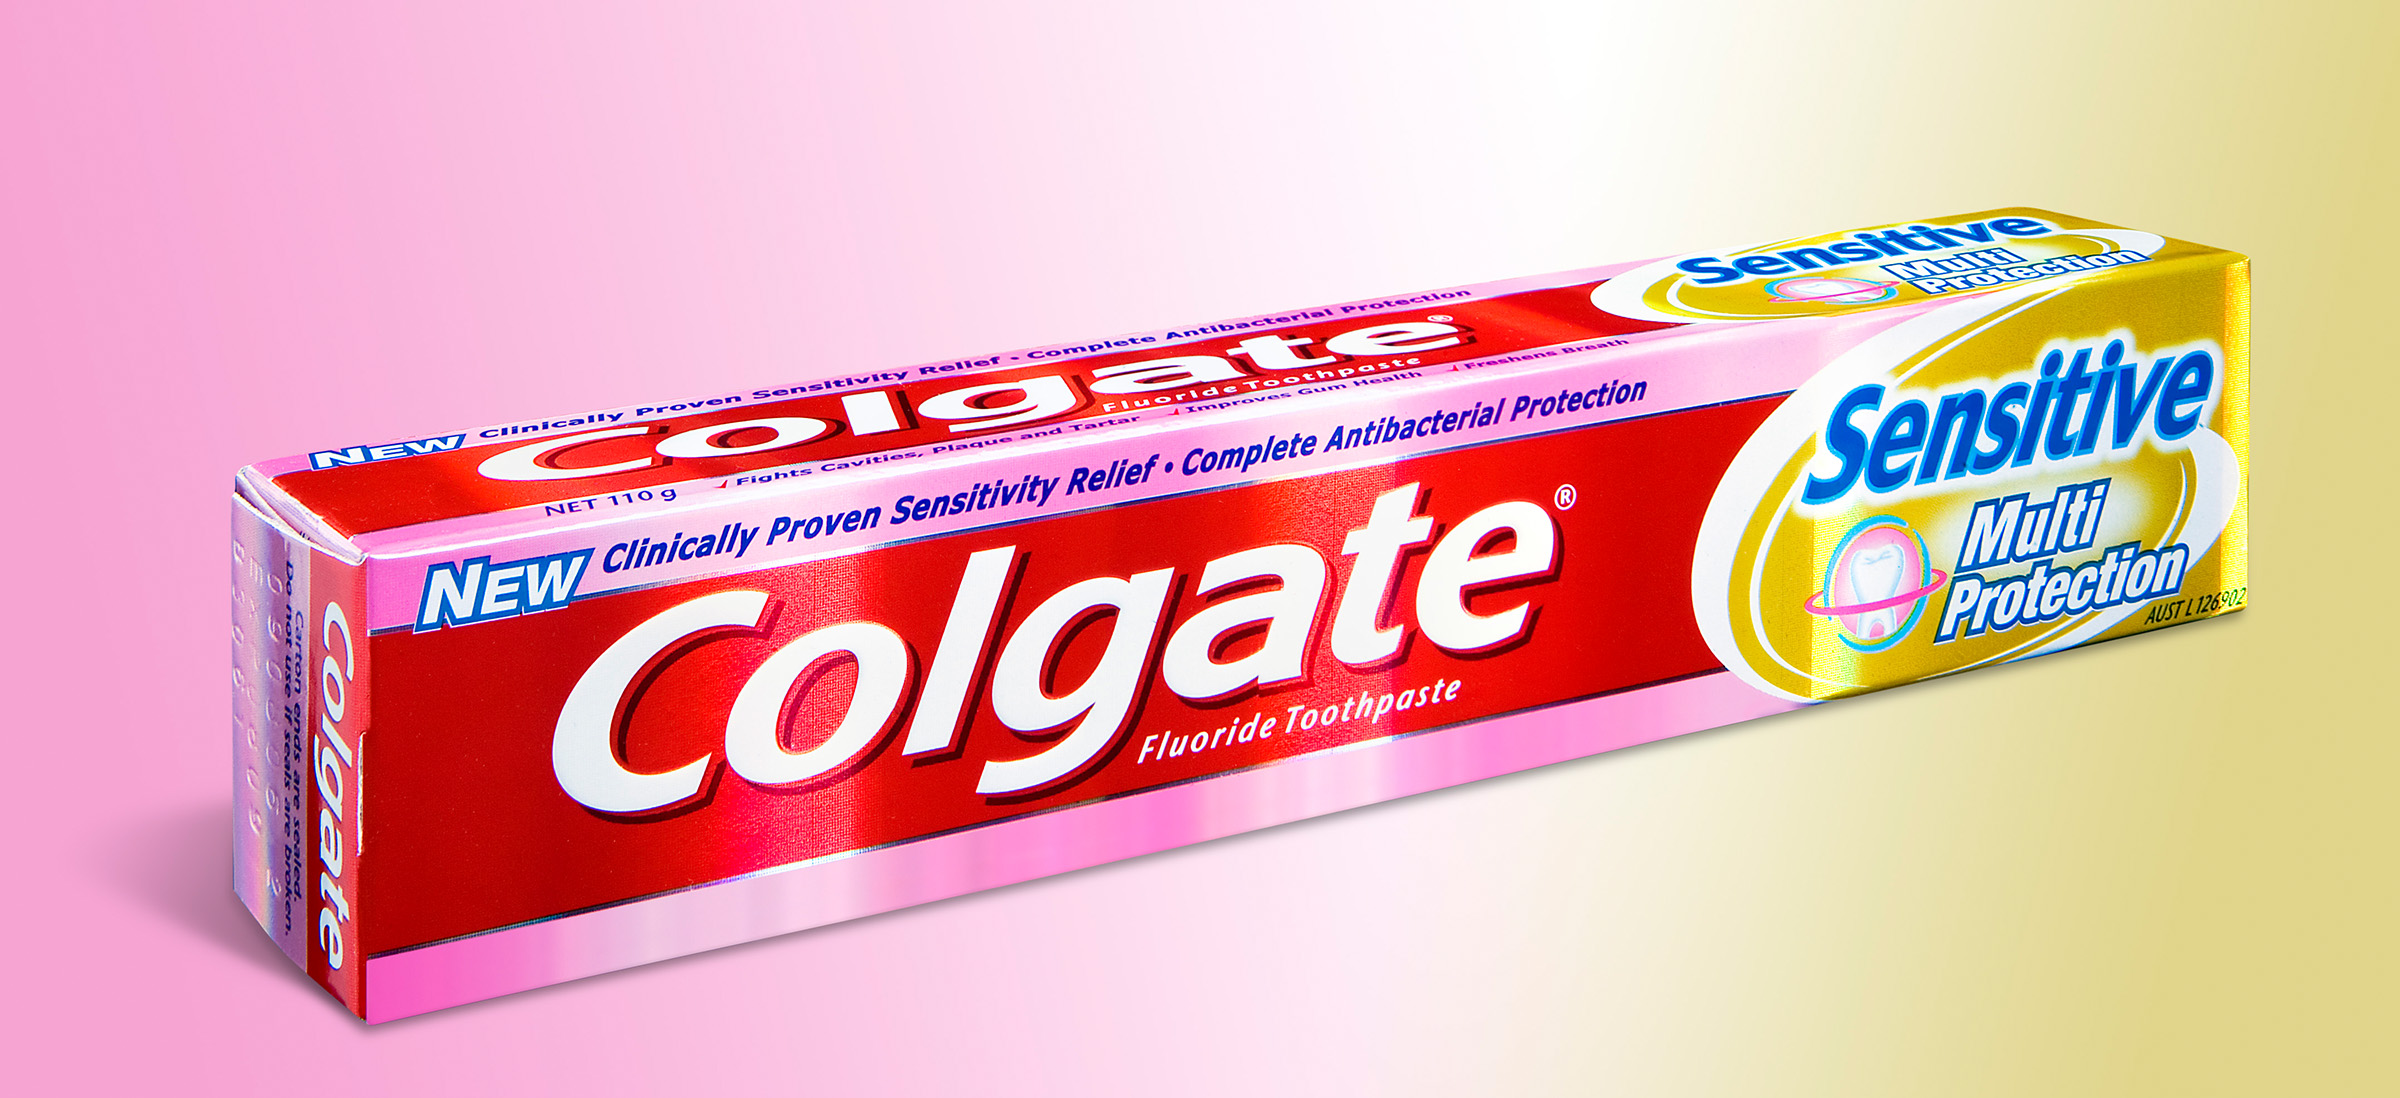 Advertising studio product photography Colgate Sensitive toothpaste